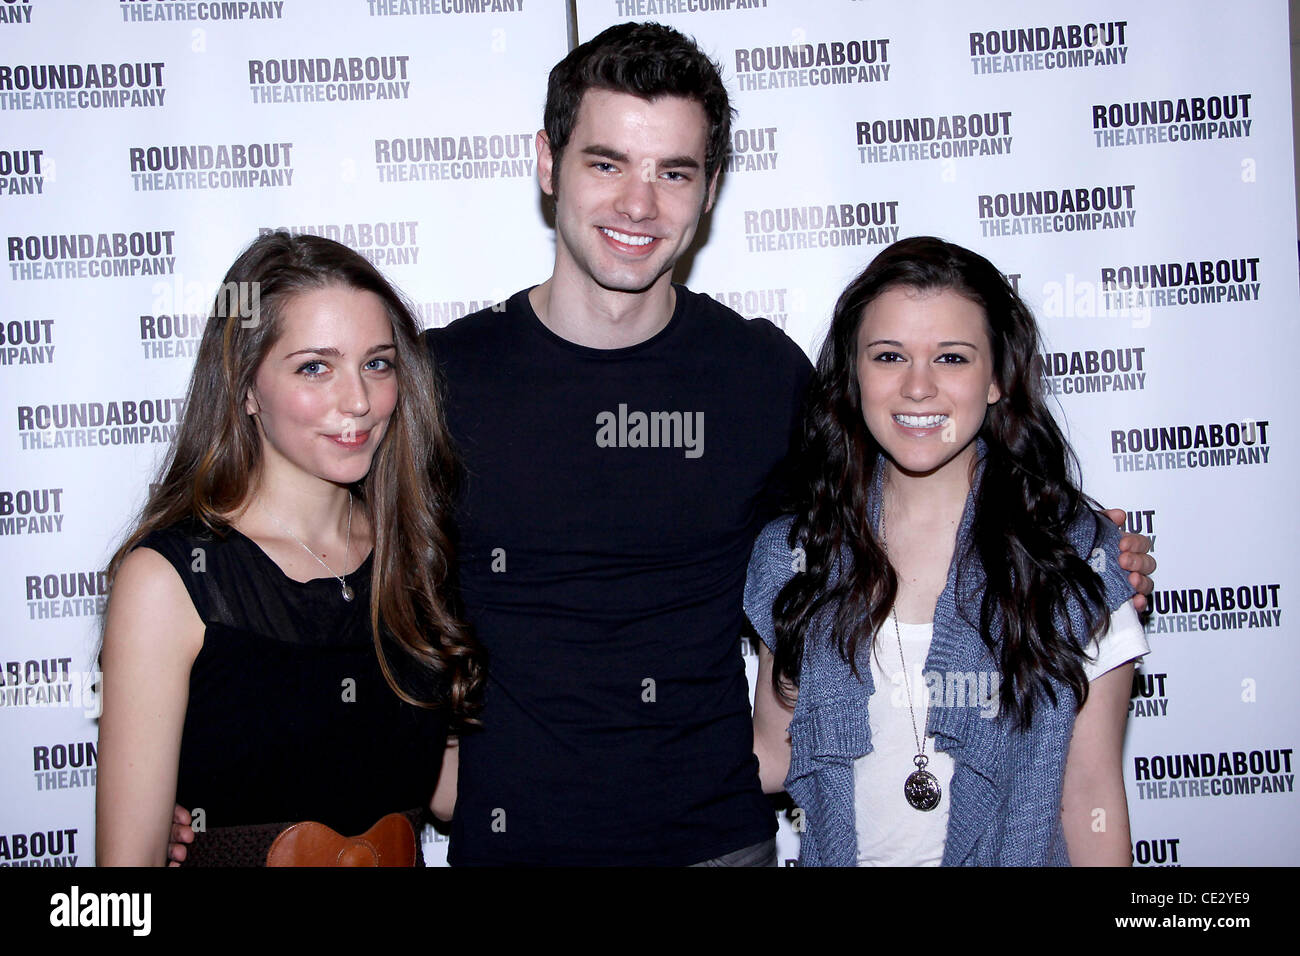 Jessica Rothenberg, Jake O'Connor and Alexandra Socha meet and greet with the cast of the Off-Broadway production 'The Dream of the Burning Boy' at the Roundabout Theatre Company rehearsal space New York City, USA - 09.02.11 Stock Photo